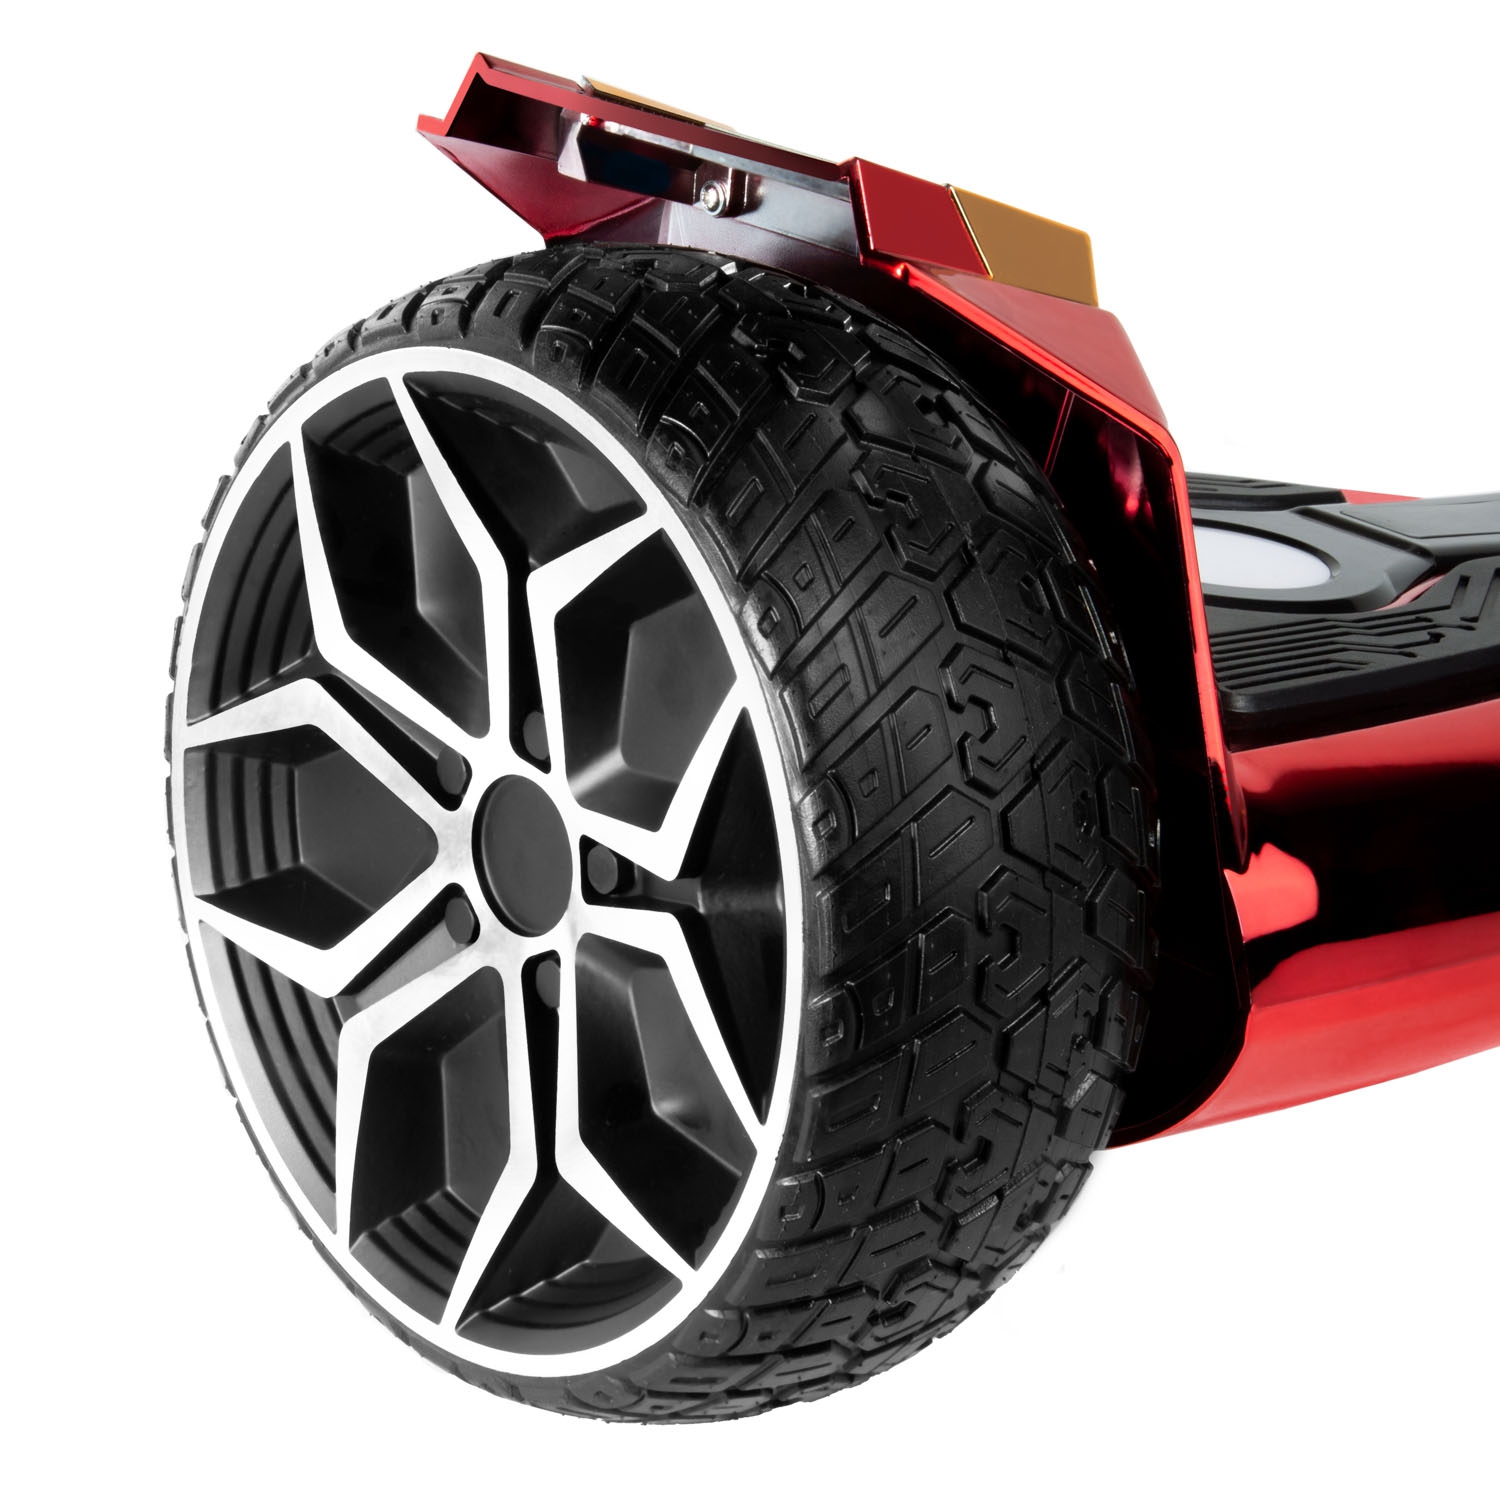 Rugged Tire XPRIT Legion 8.5'' All Terrain Off-Road Hoverboard for Adults UL2272 Certified LED Lights 